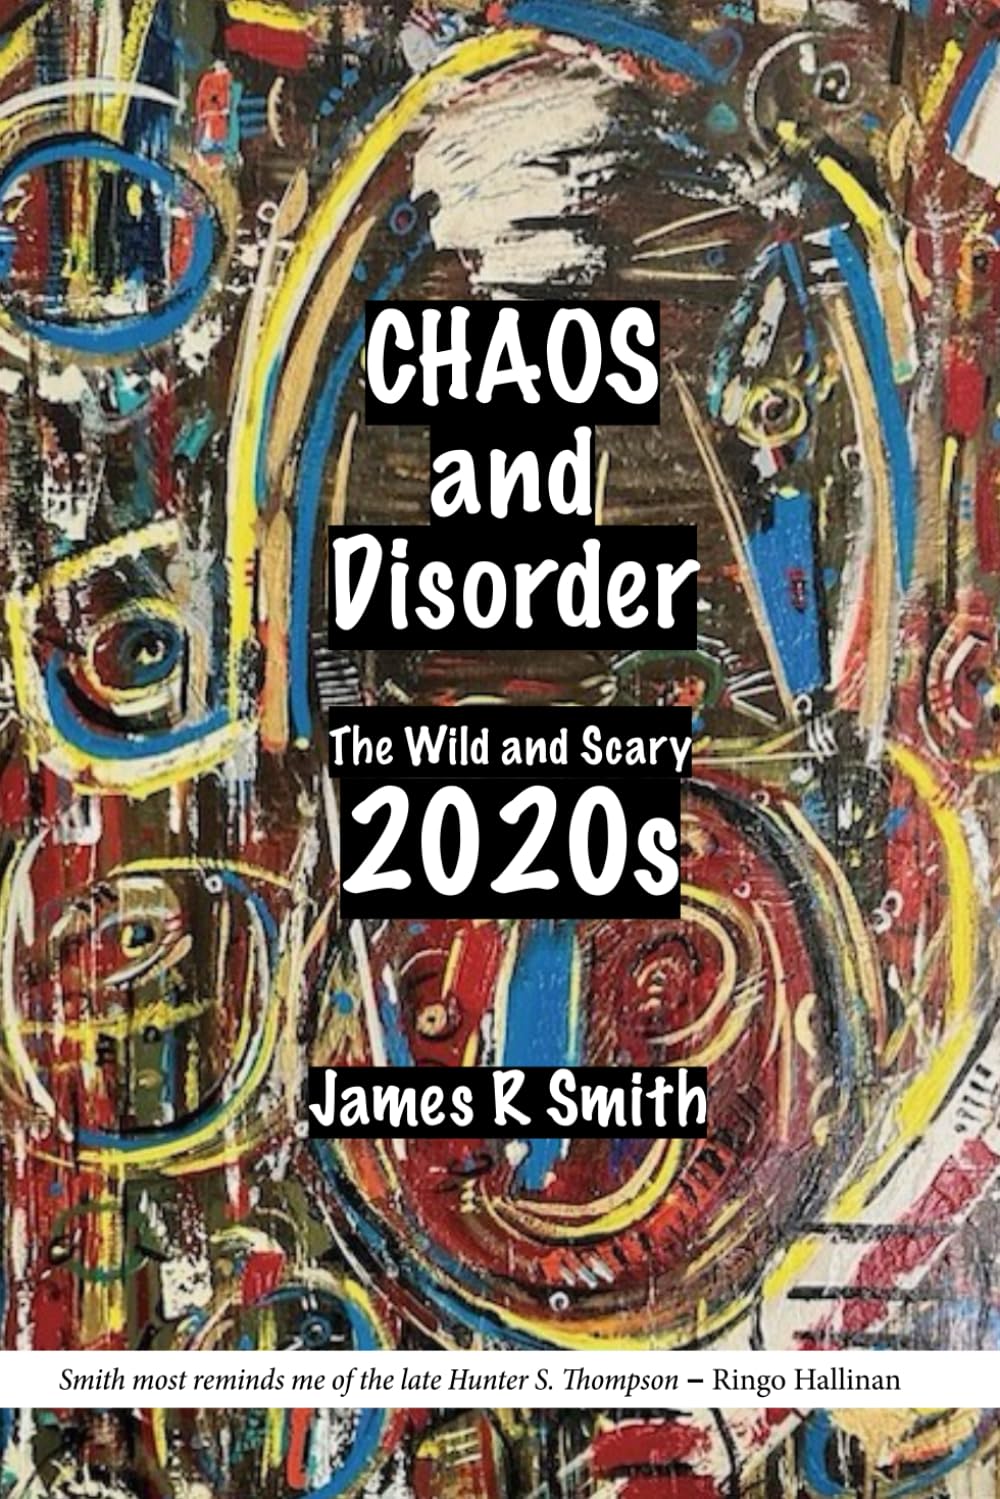 Chaos and Disorder: The Wild and Scary 2020s